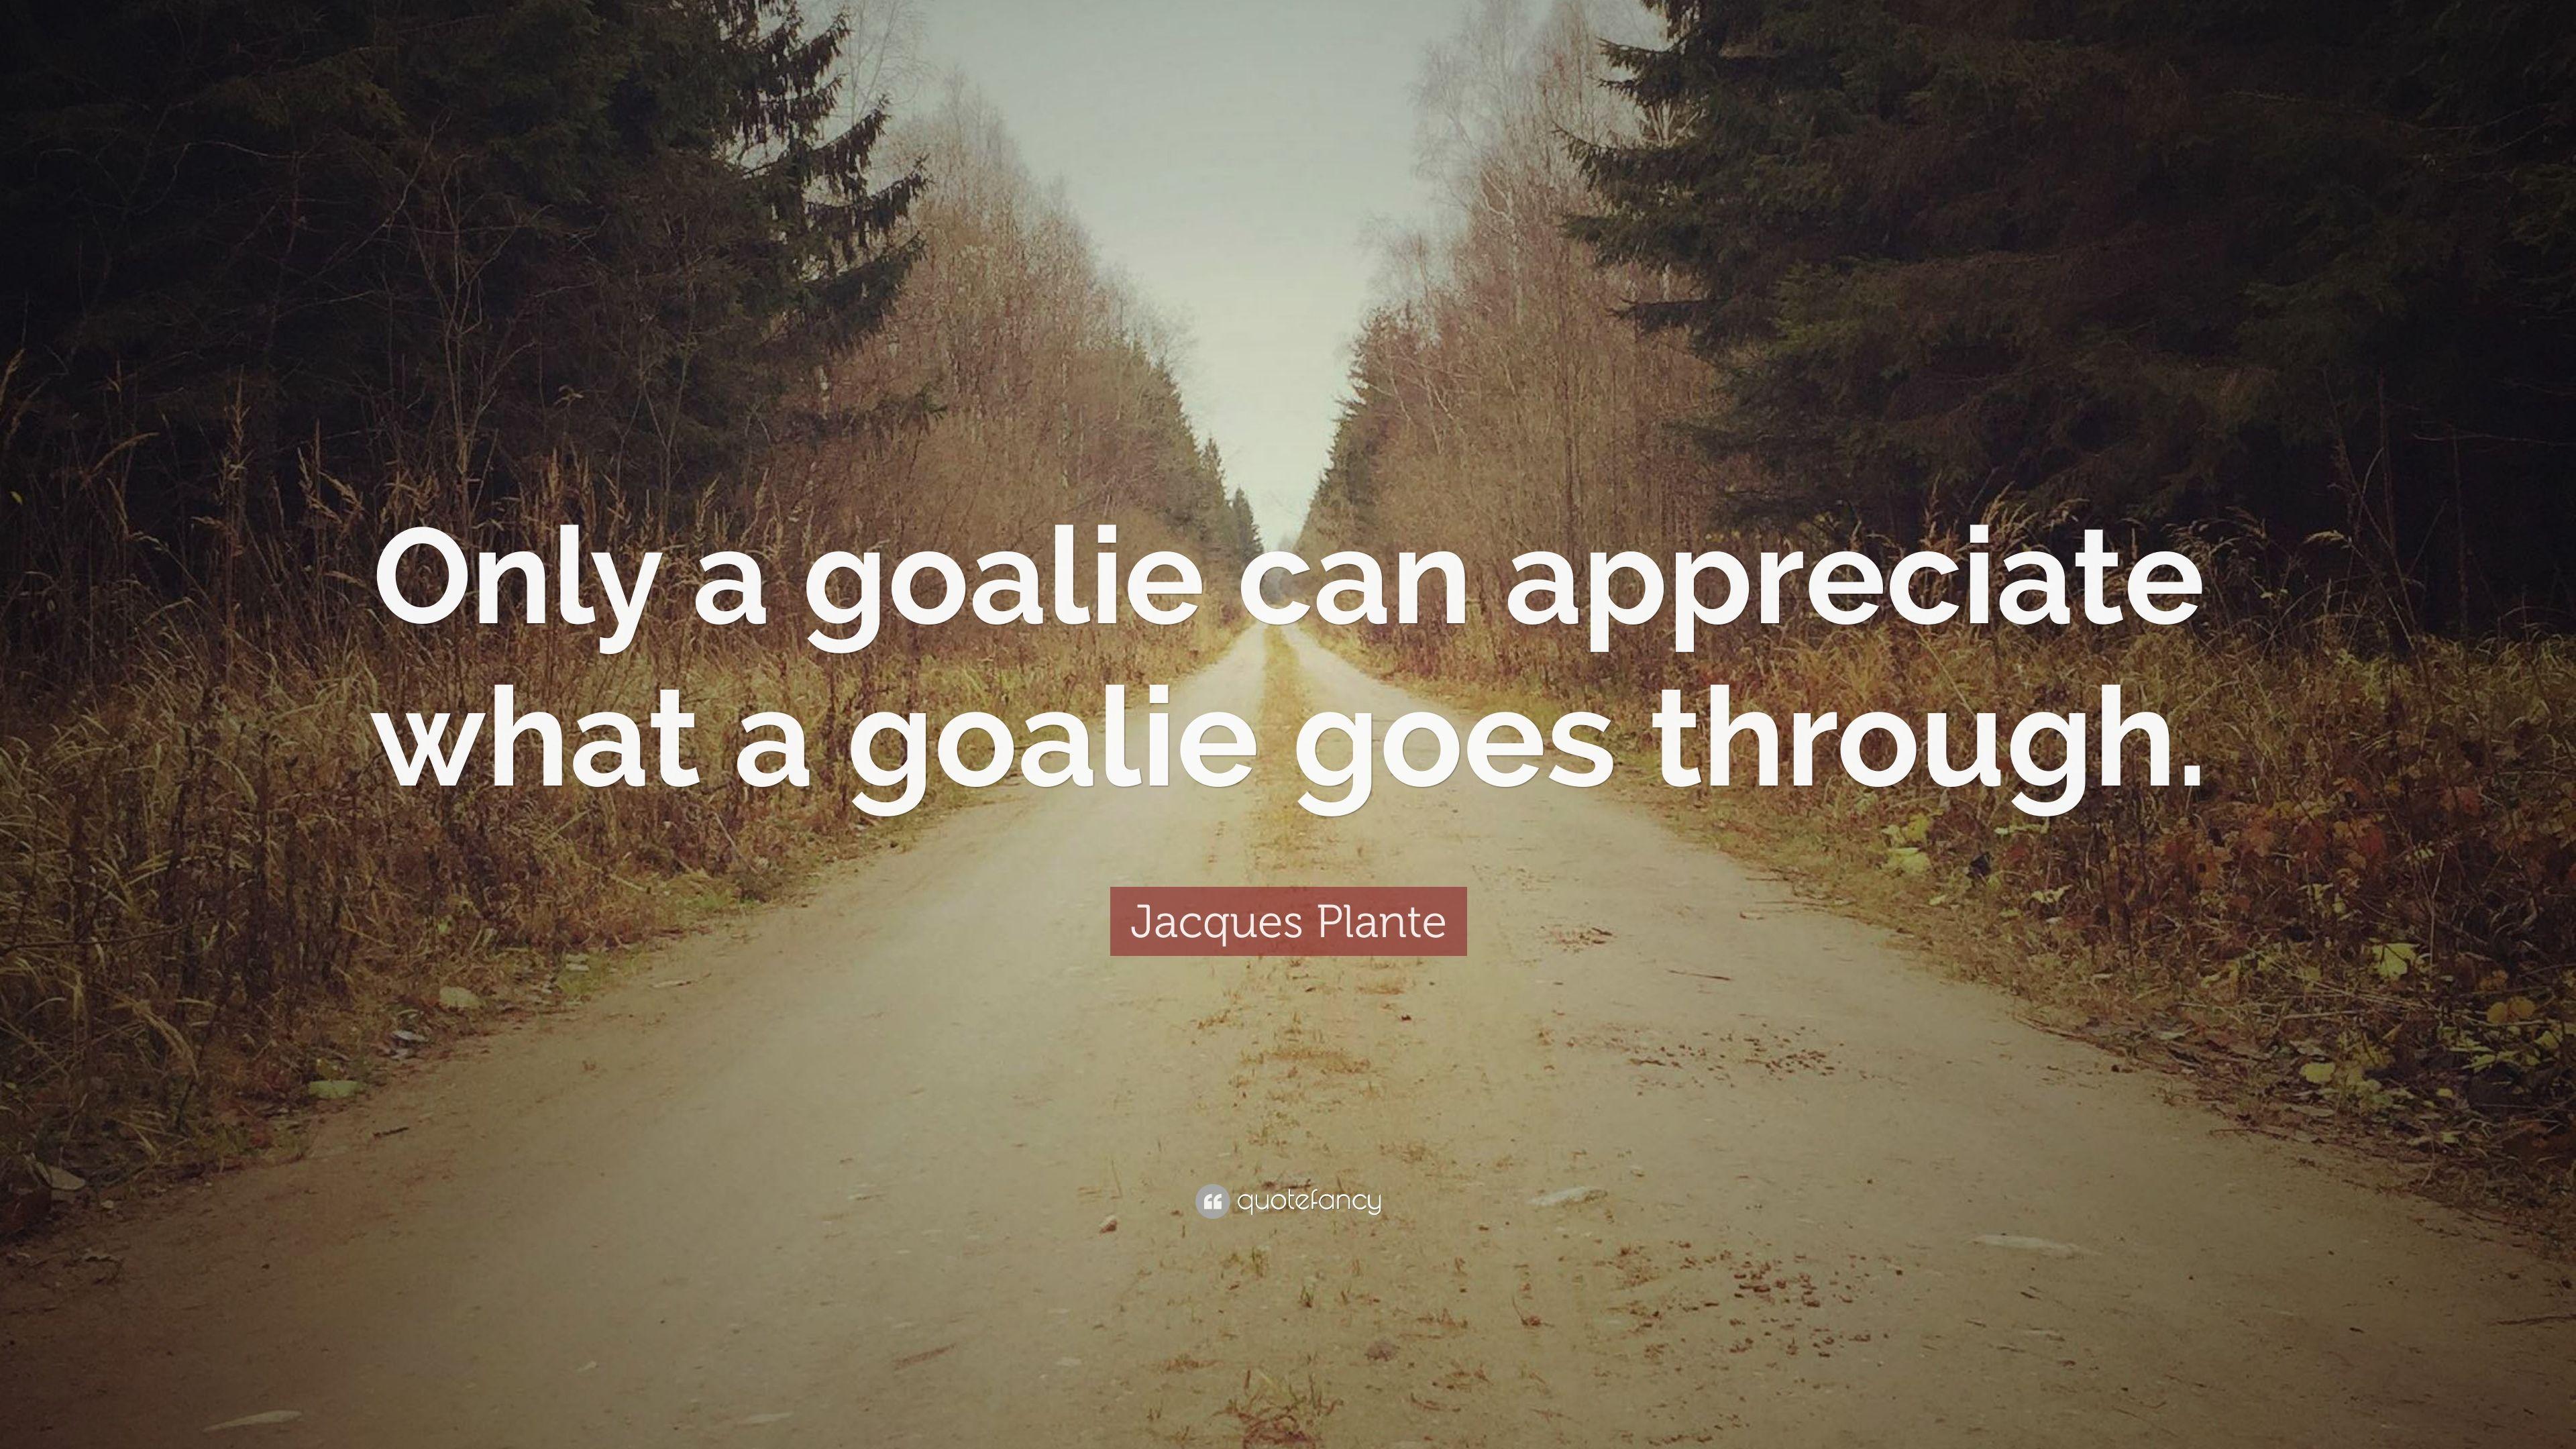 Jacques Plante Quote: “Only a goalie can appreciate what a goalie